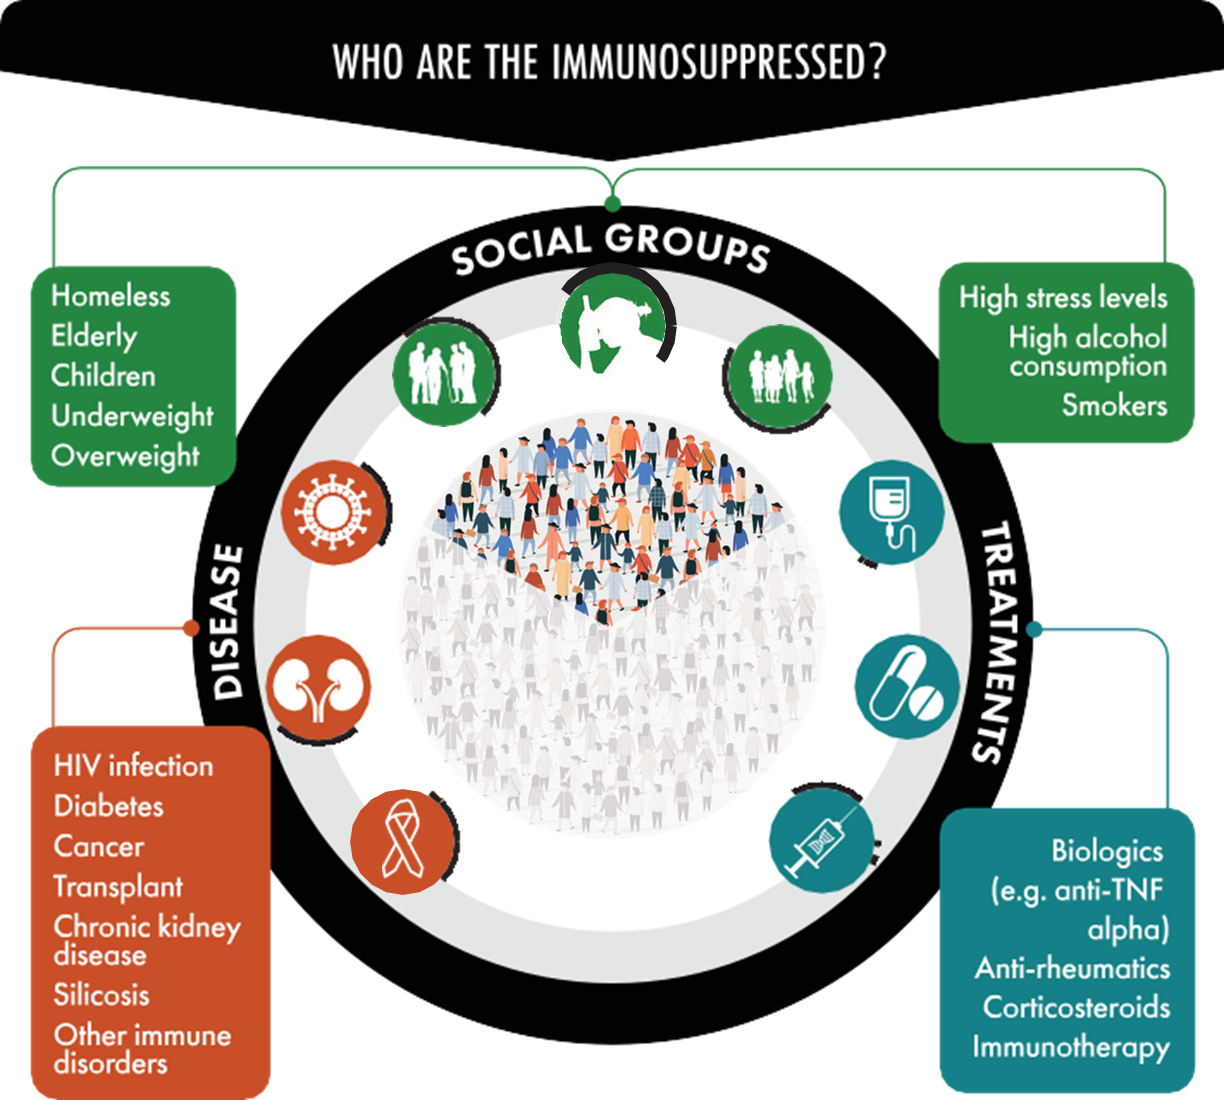 Who are the immunosuppressed